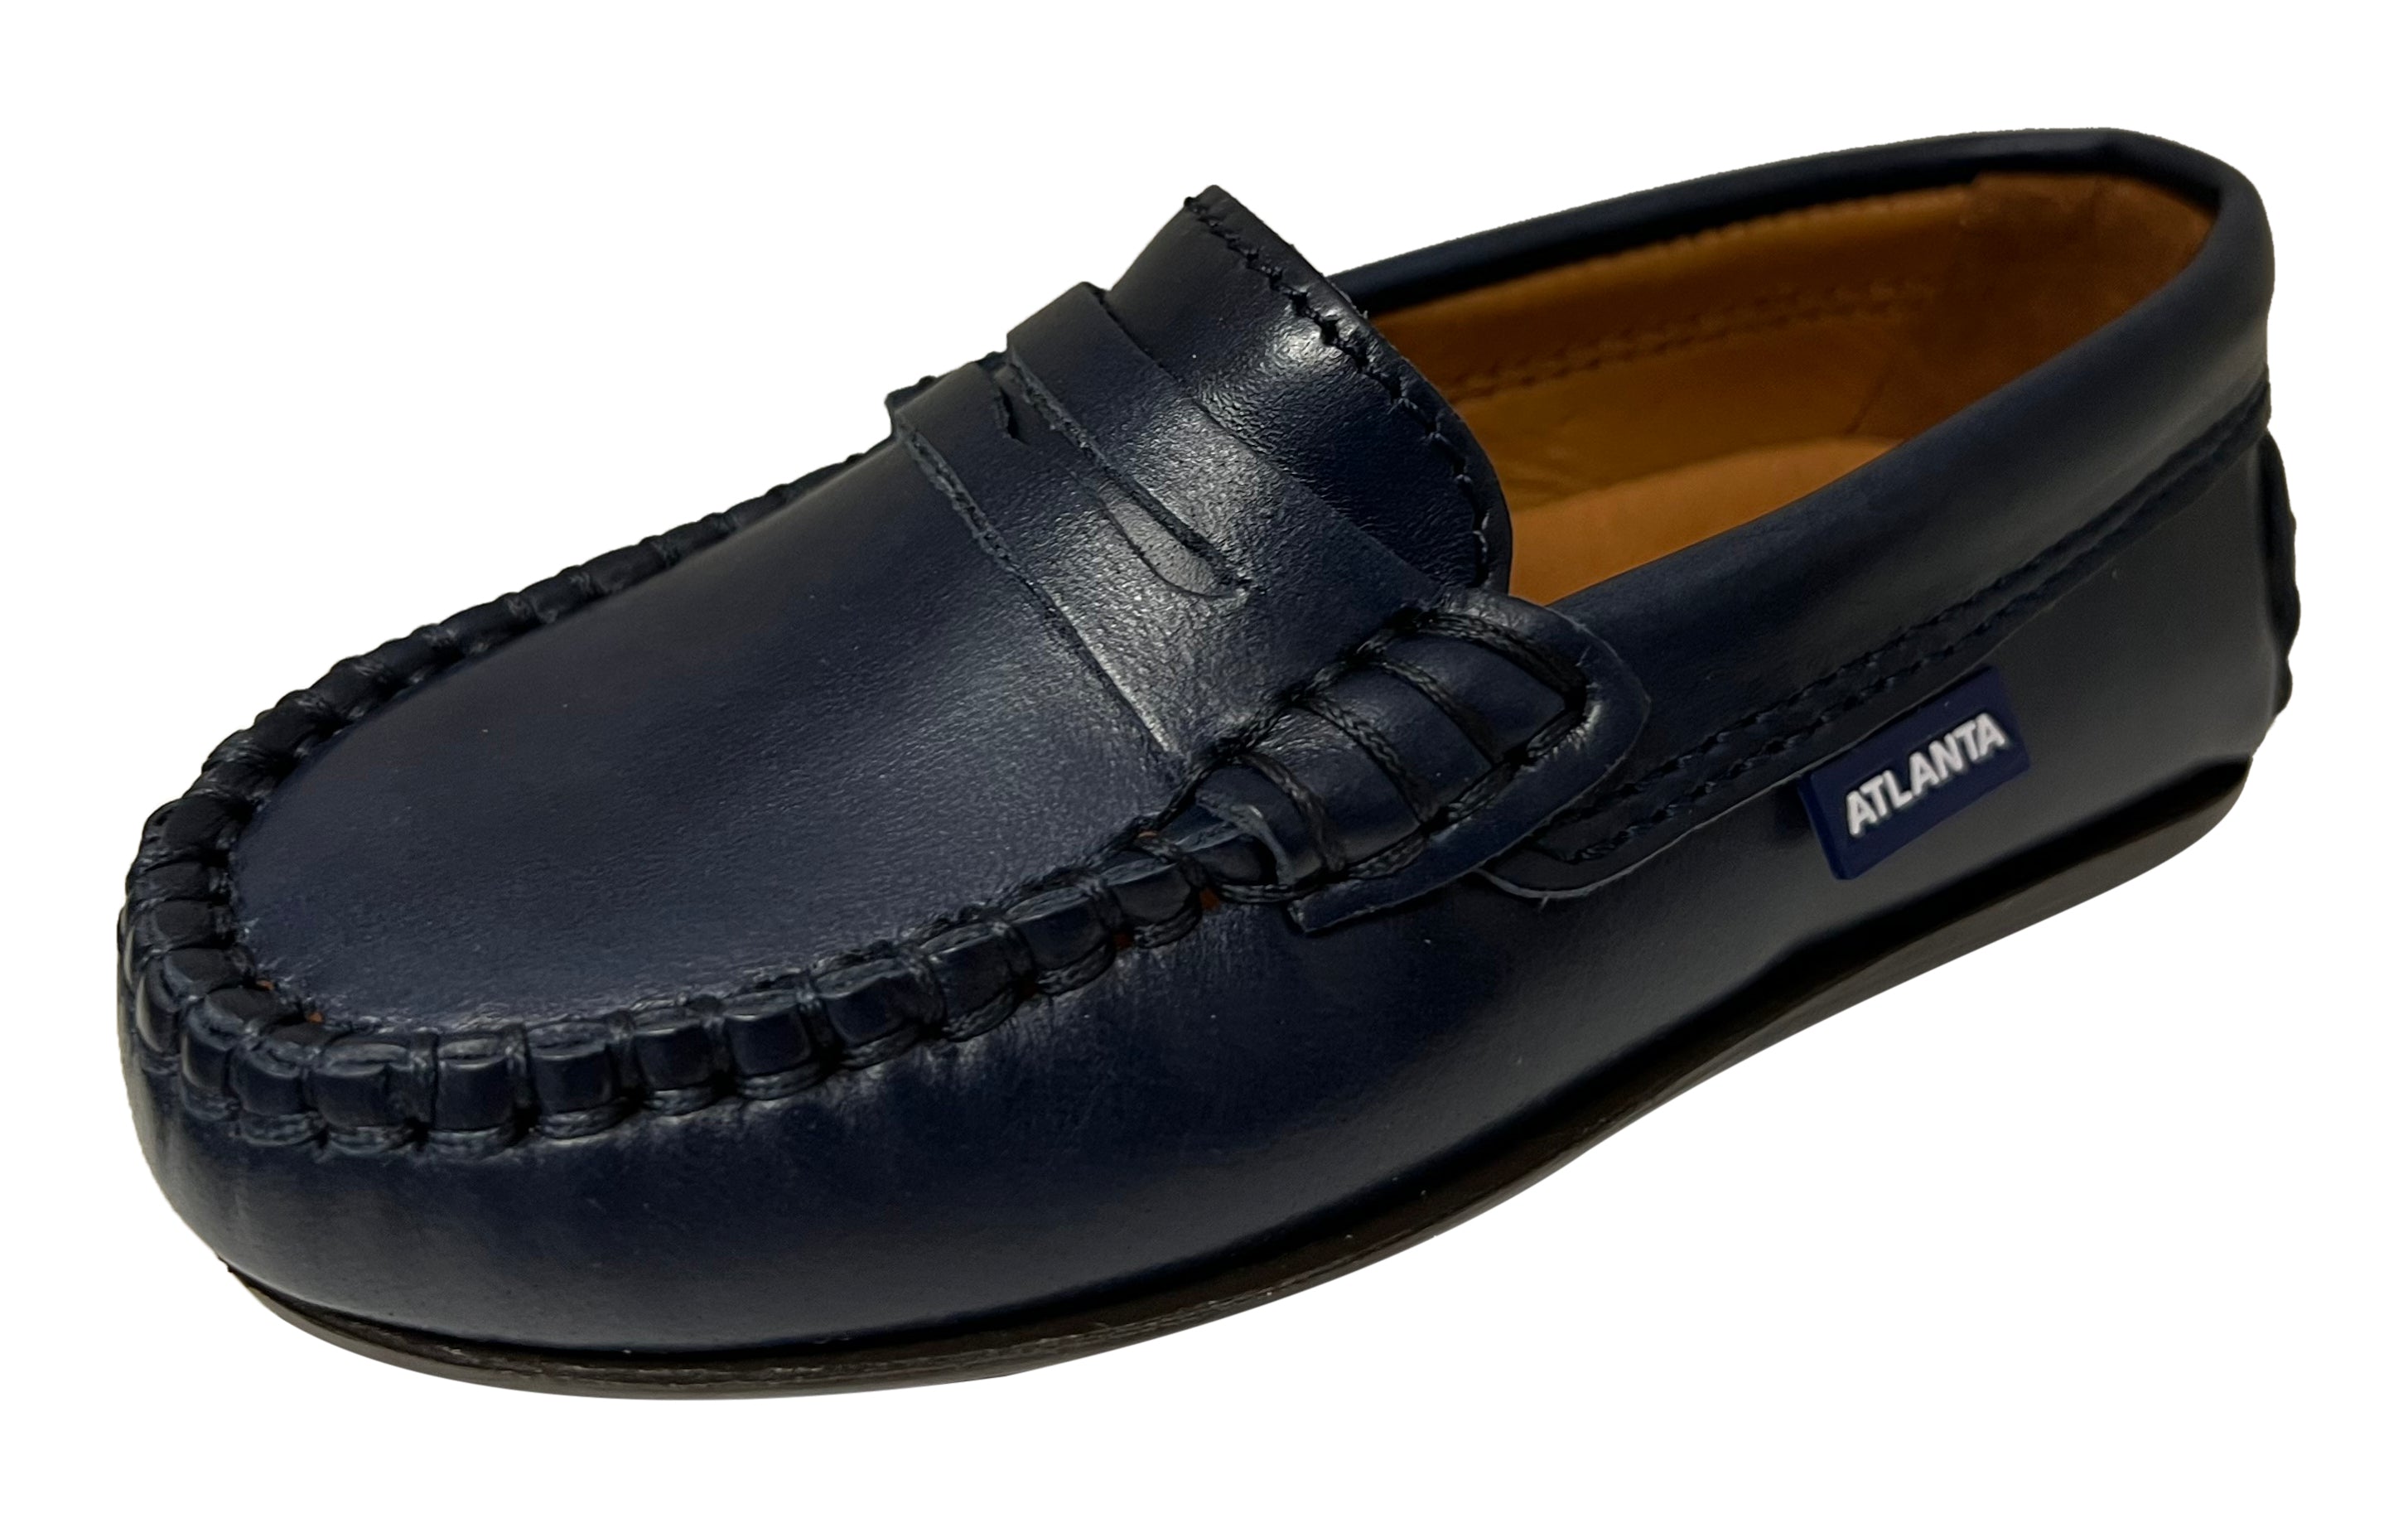 Atlanta Mocassin Boy's and Girl's Smooth Leather Penny Navy B – Just Shoes for Kids